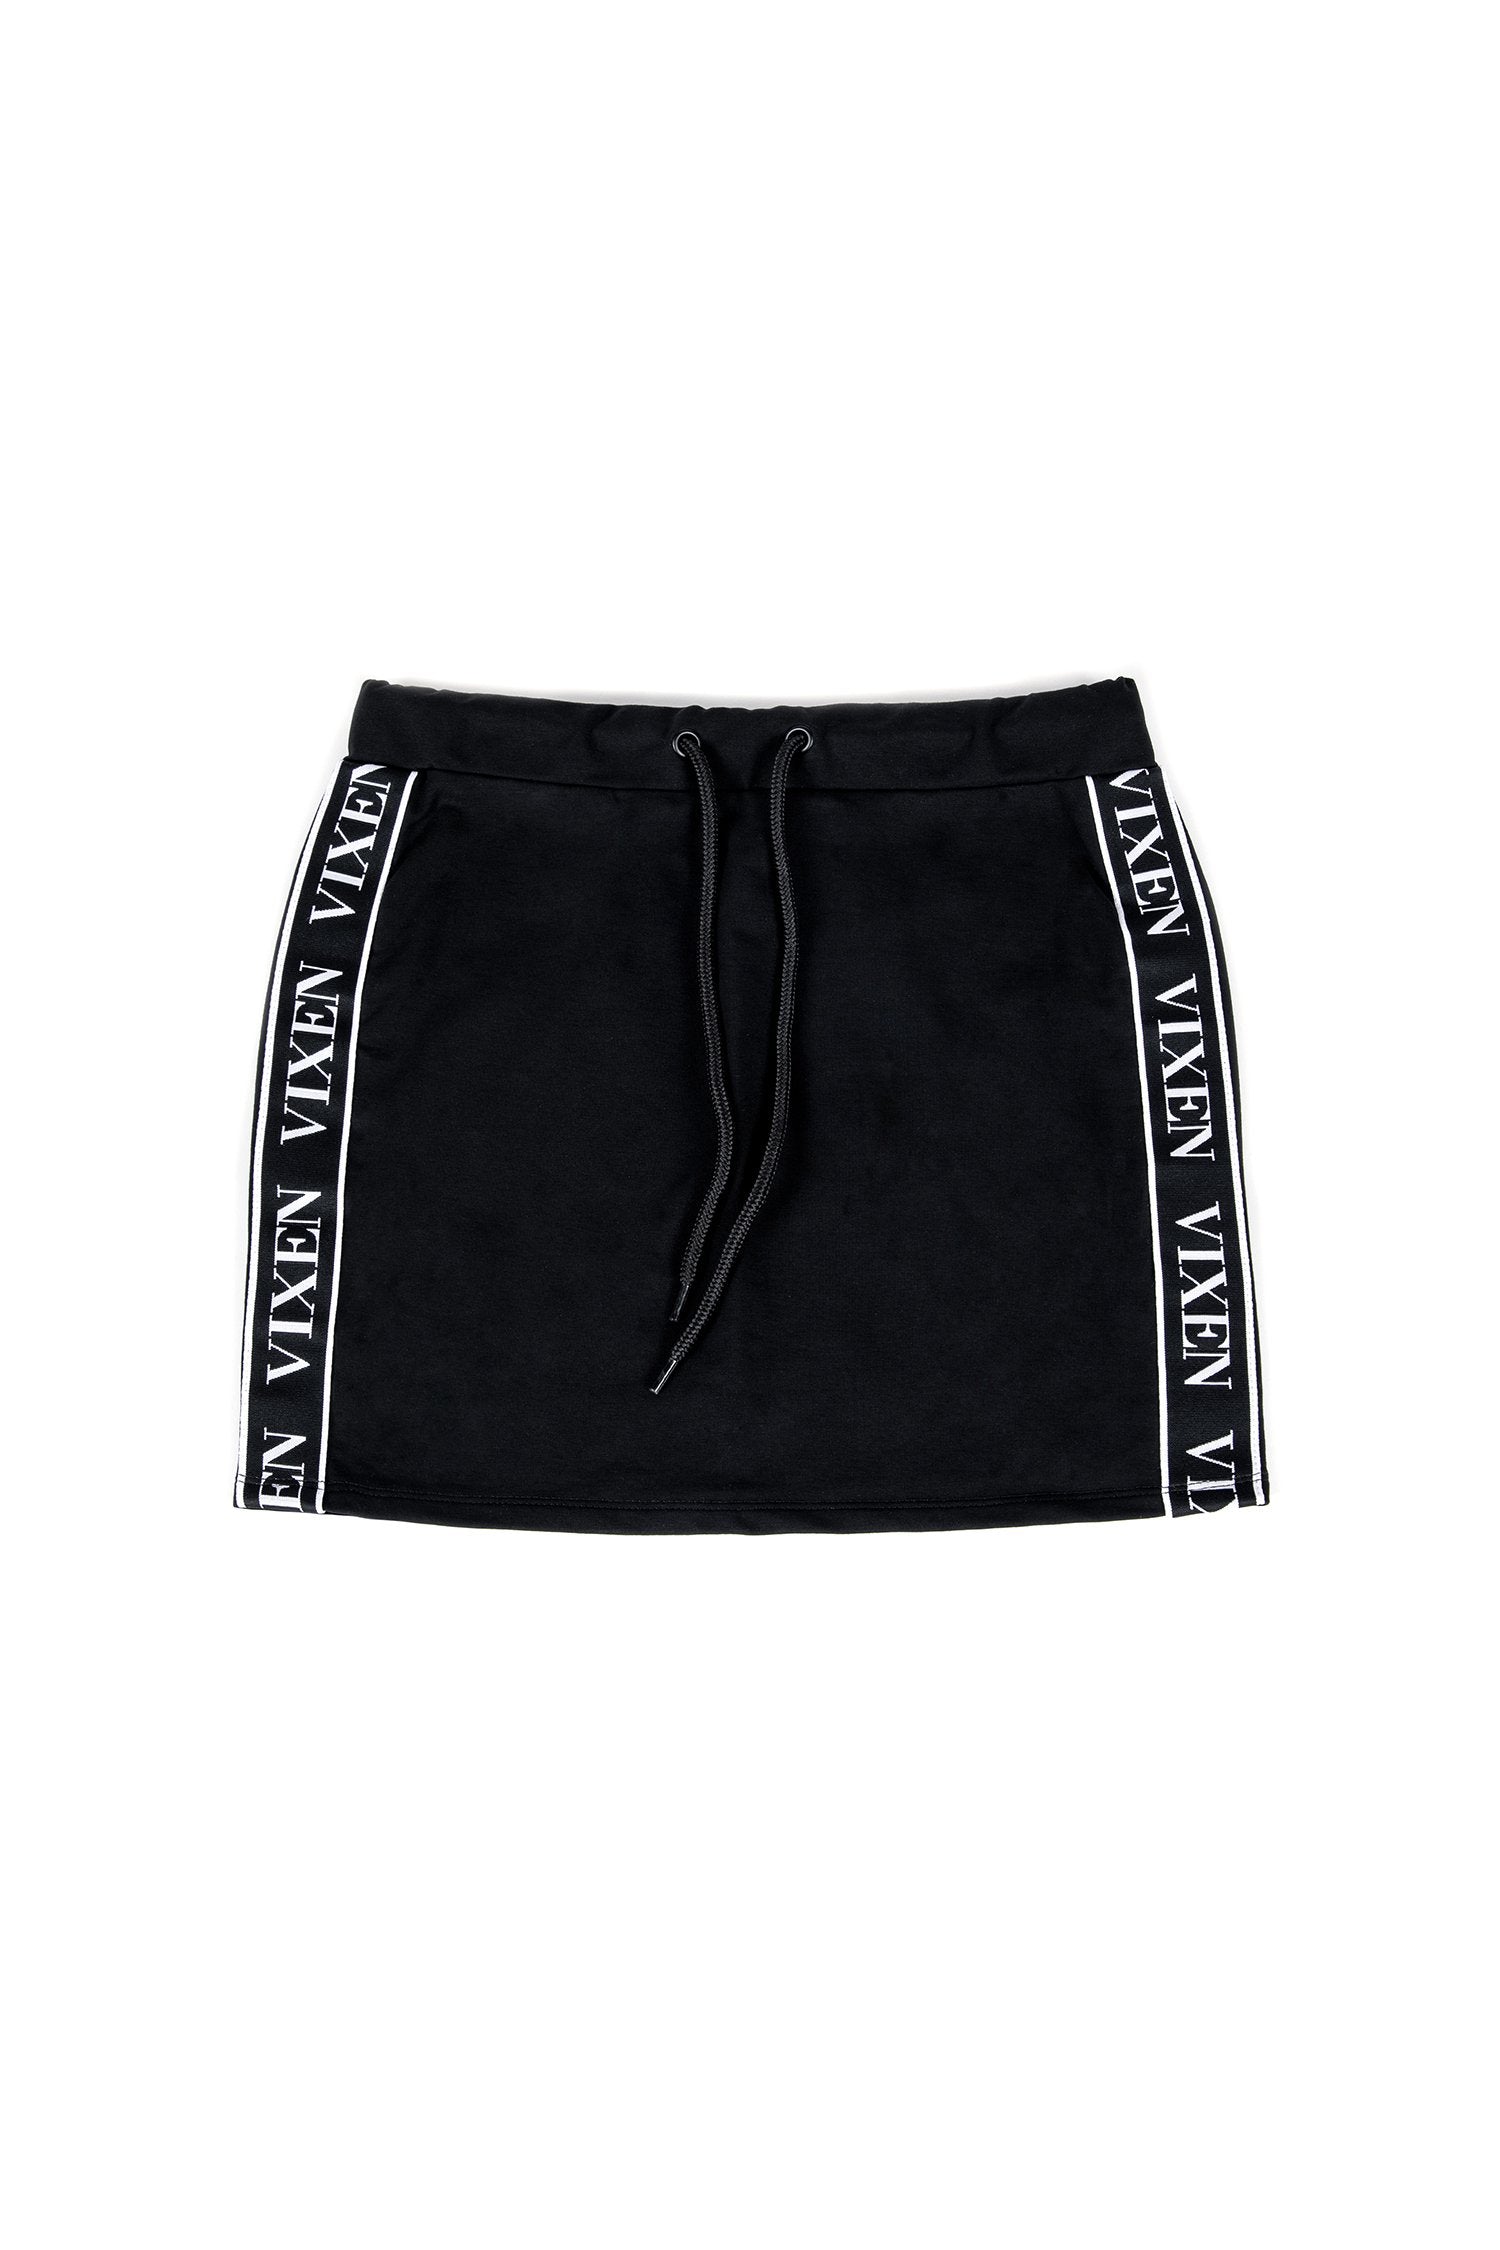 Skirts & Shorts Archives - House of Vixen